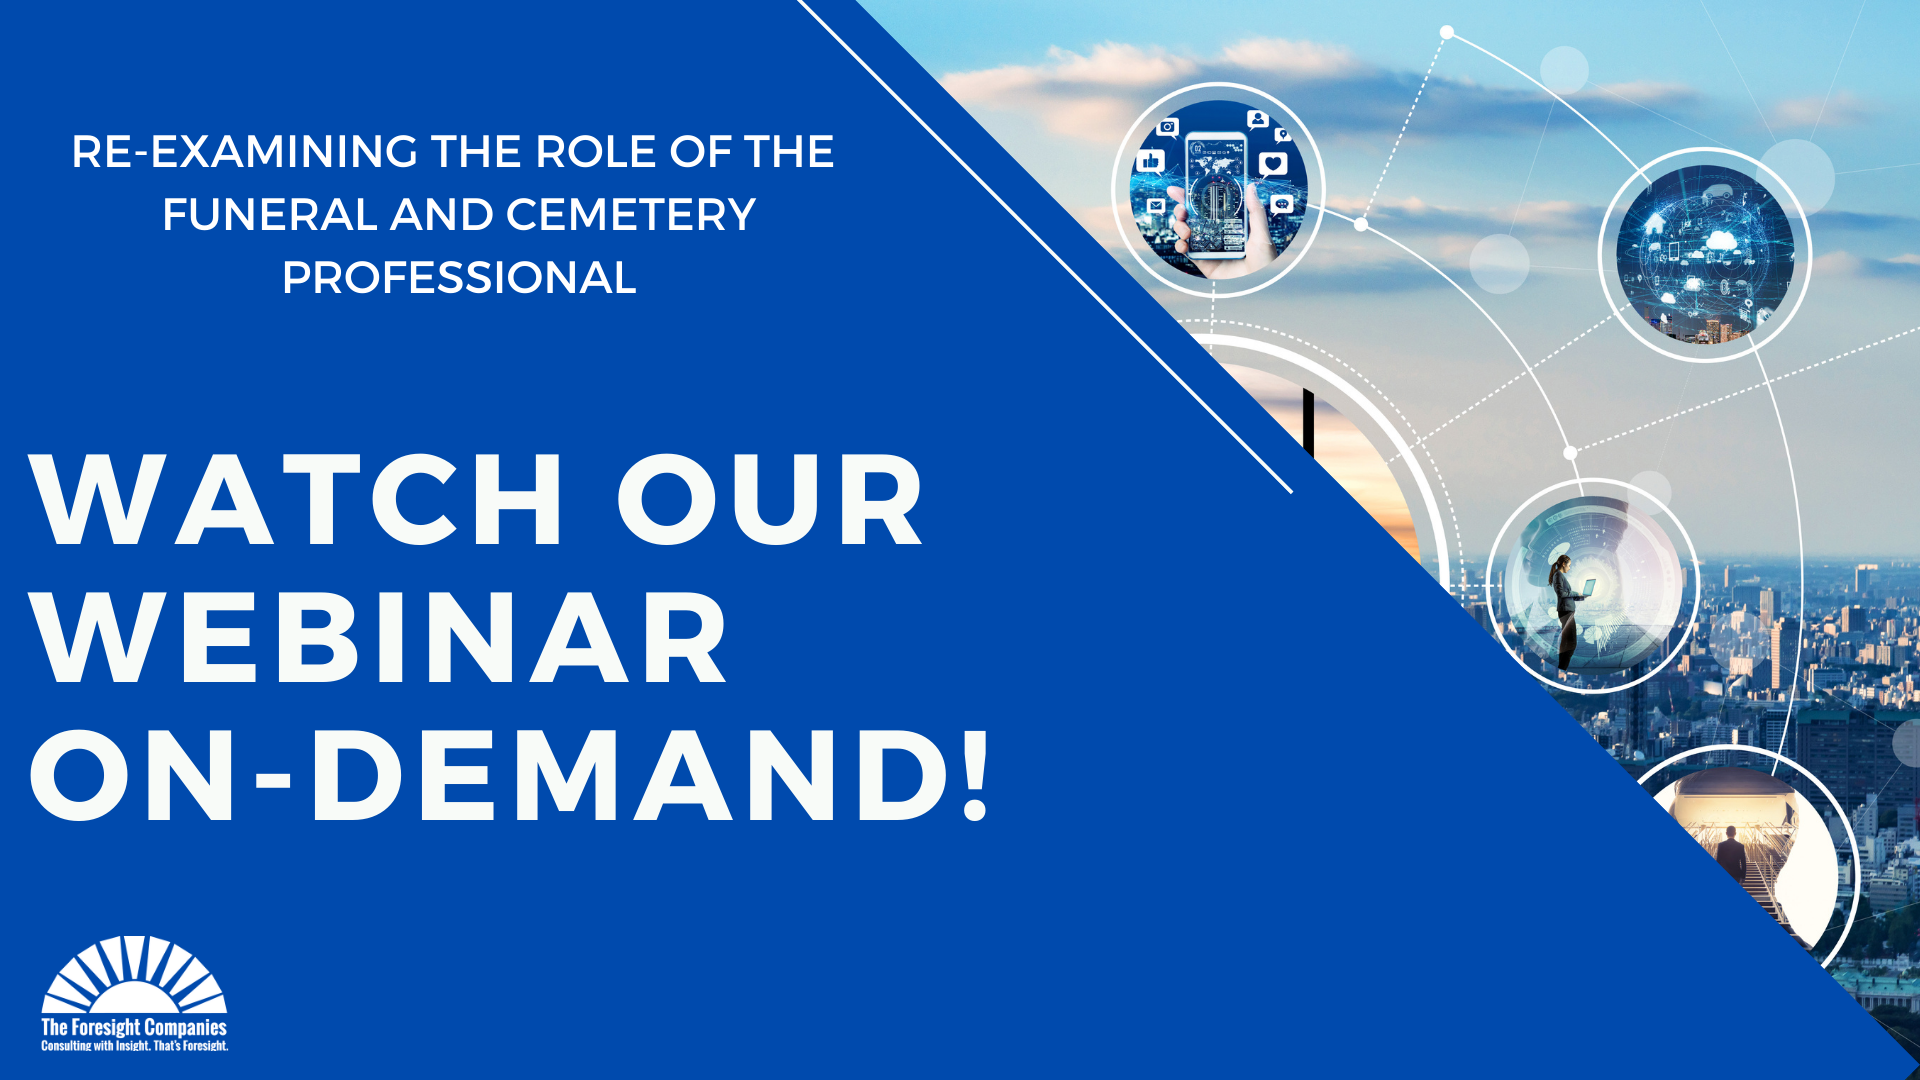 Re Examining the Role of the Funeral and Cemetery Professional webinar is available on demand